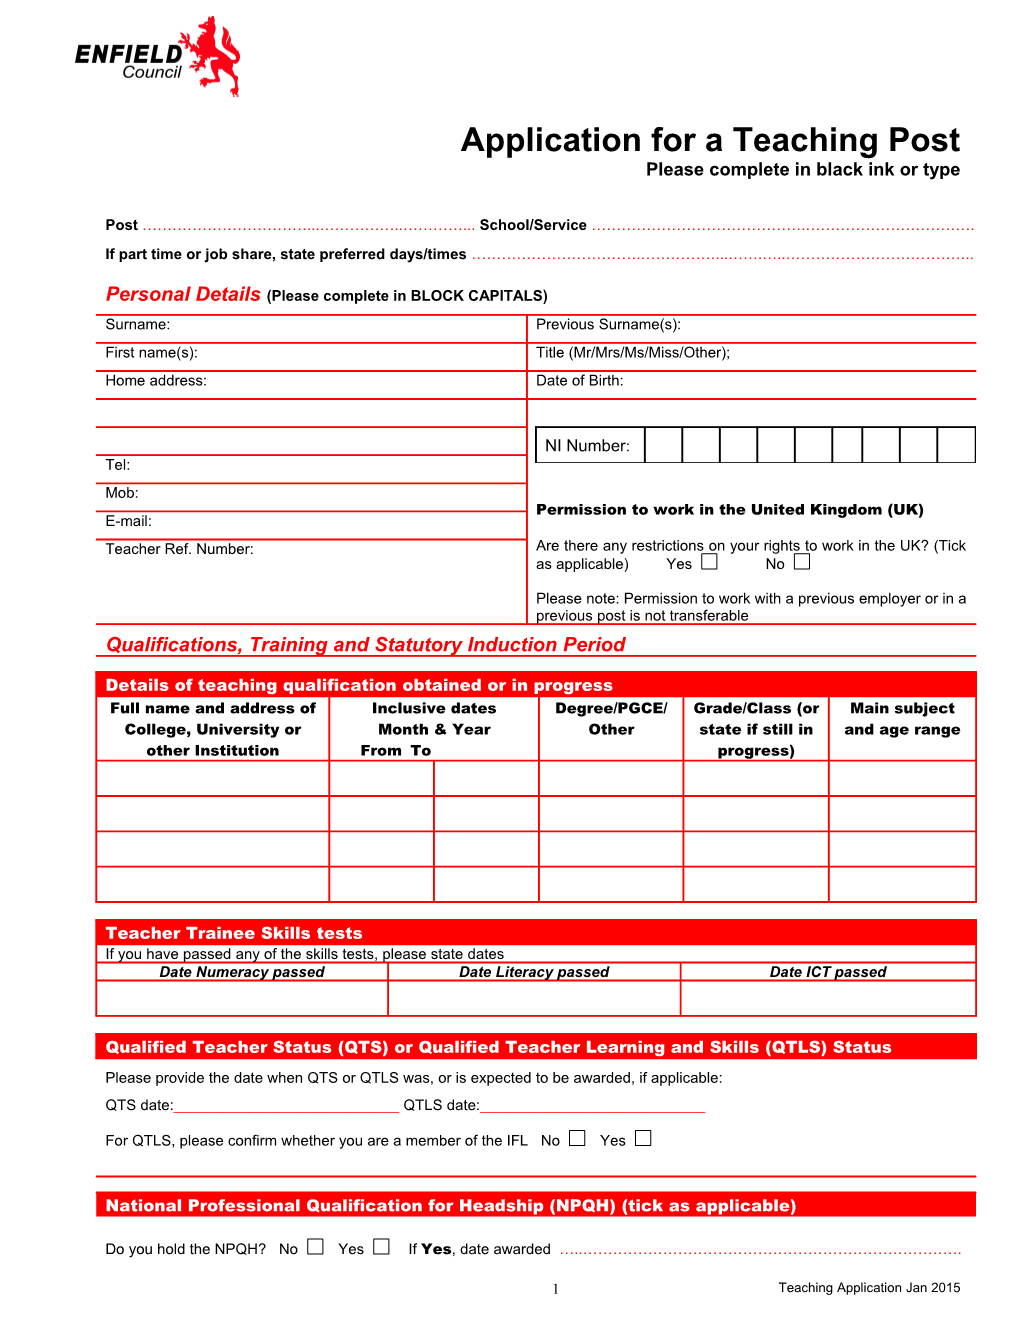 Application for the Primary Pool